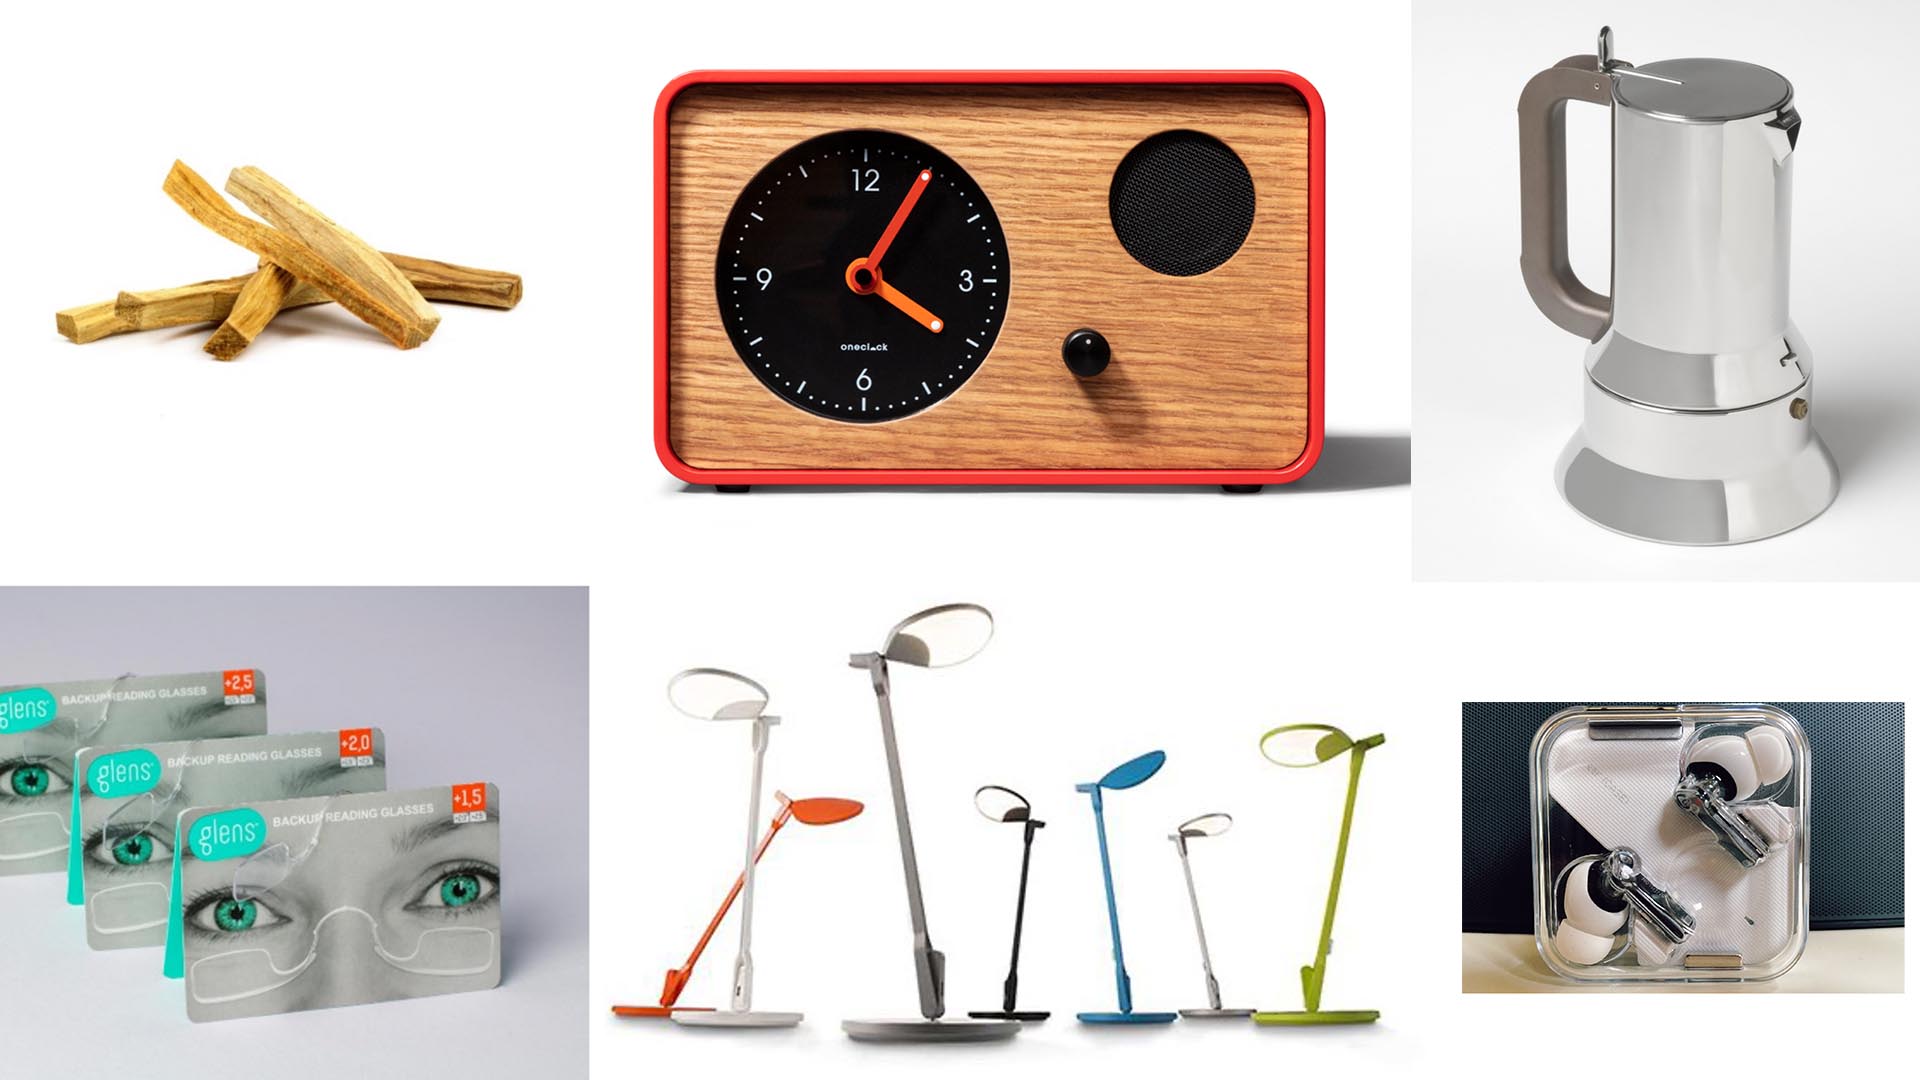 9 unique gift ideas from a product designer